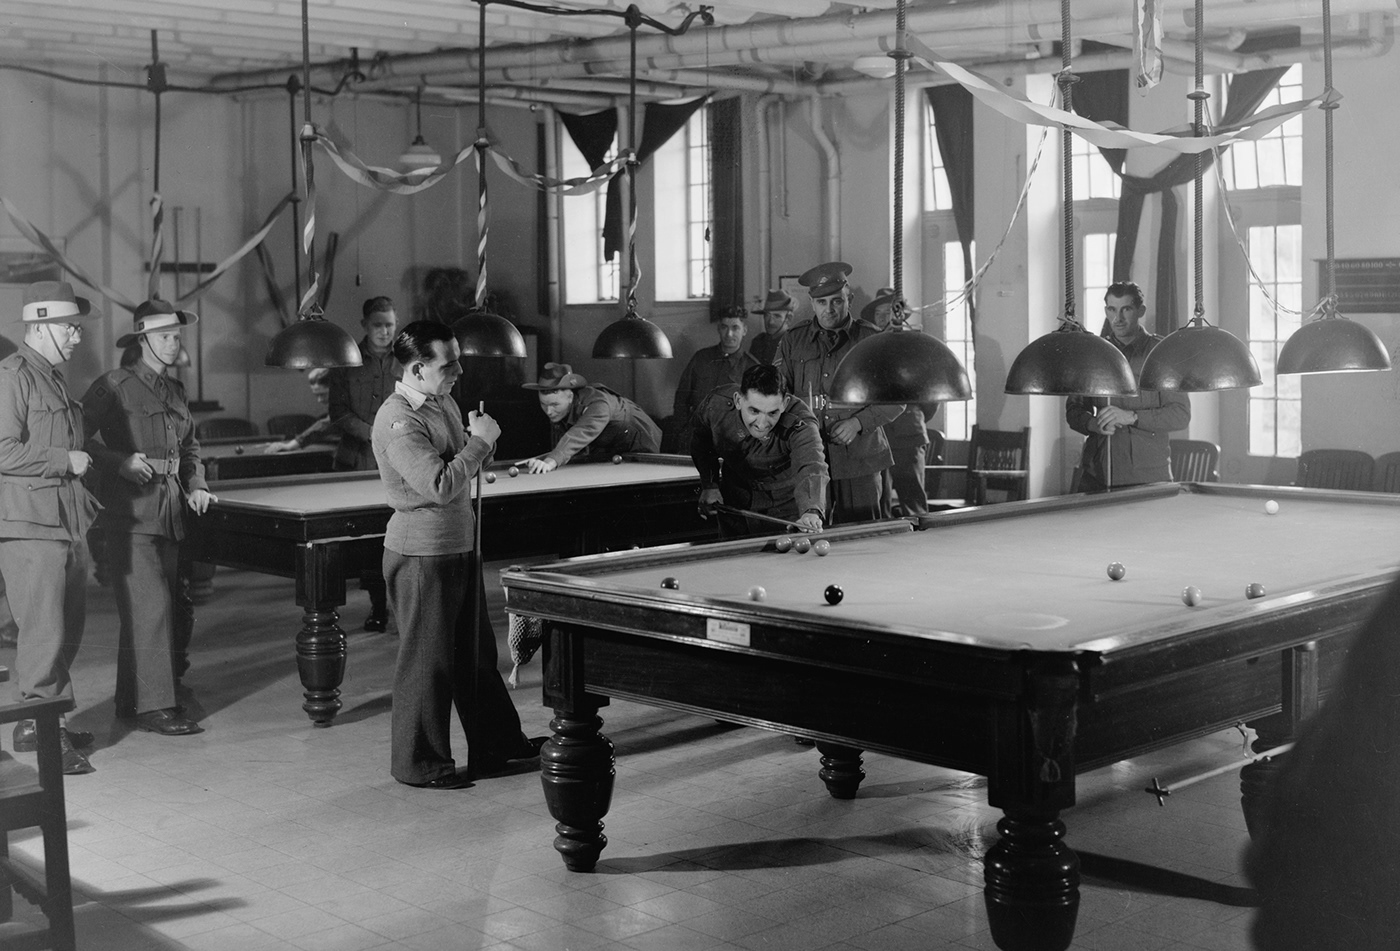 Old photo of soldiers playing billiards in a wide room with many billiards tables